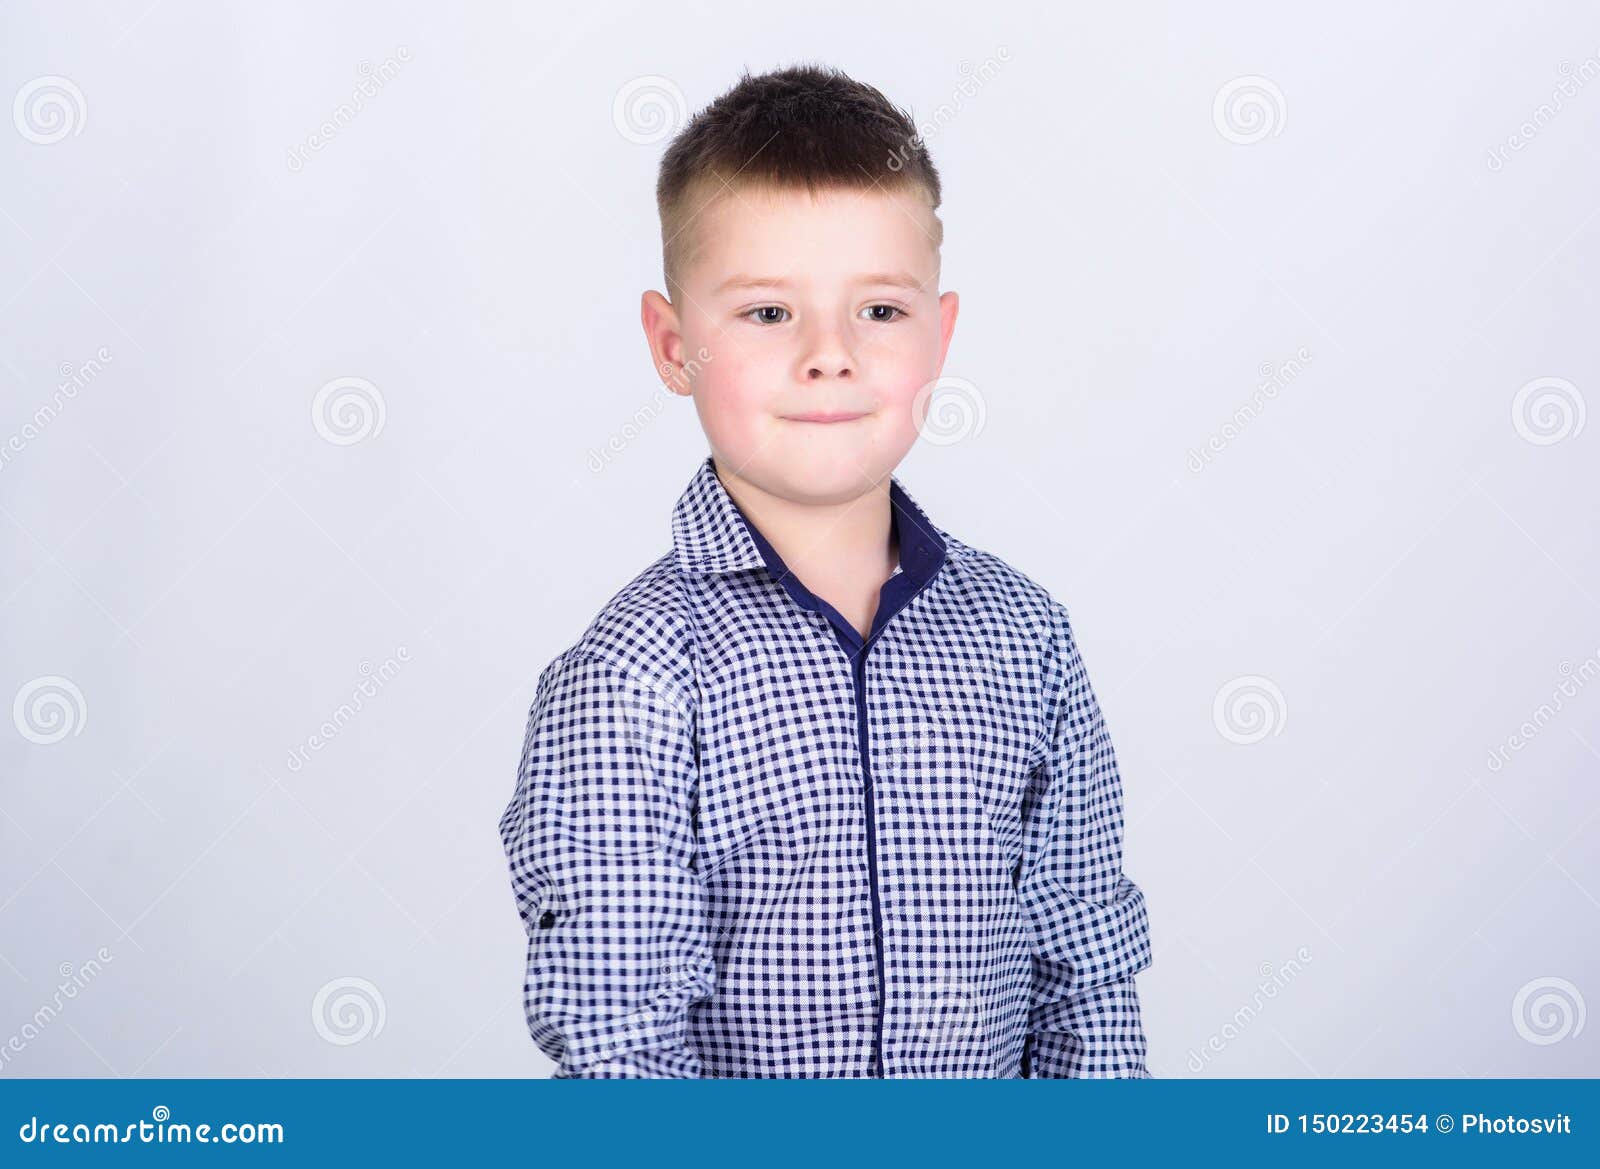 Boy Modern Hairstyle Wear Formal Style Shirt Light Background. Confident Guy  Enjoy Fashionable Outfit Stock Photo - Image of appearance, found: 150223454